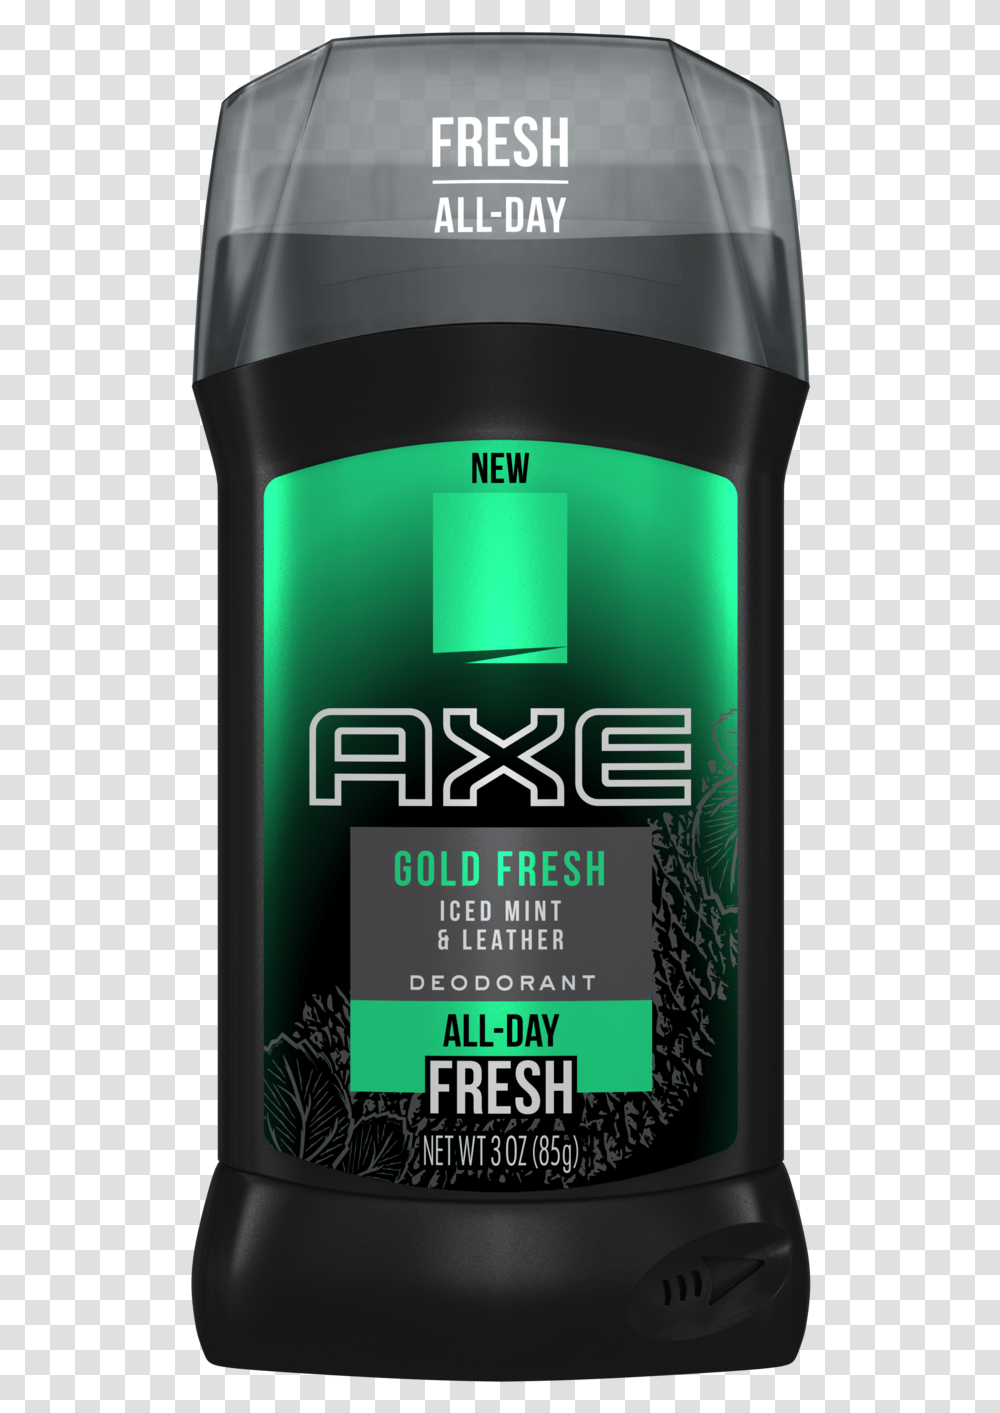 Thumb Image Deodorant Axe Gold, Bottle, Cosmetics, Mobile Phone, Electronics Transparent Png